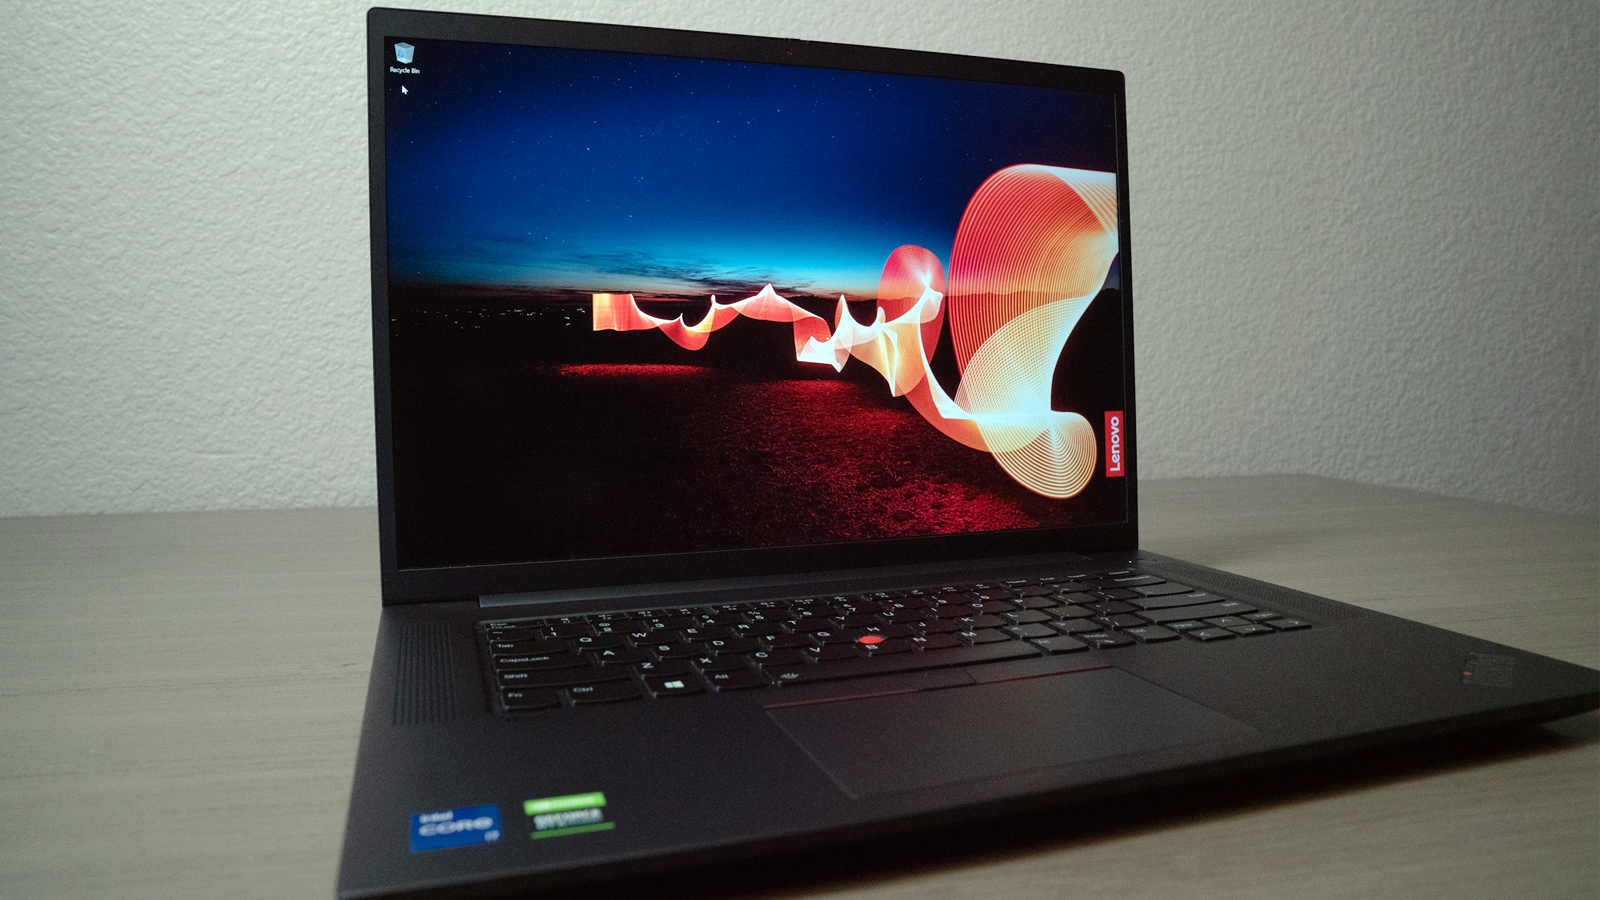 Looking at the Lenovo Gen 4 laptop from an angle